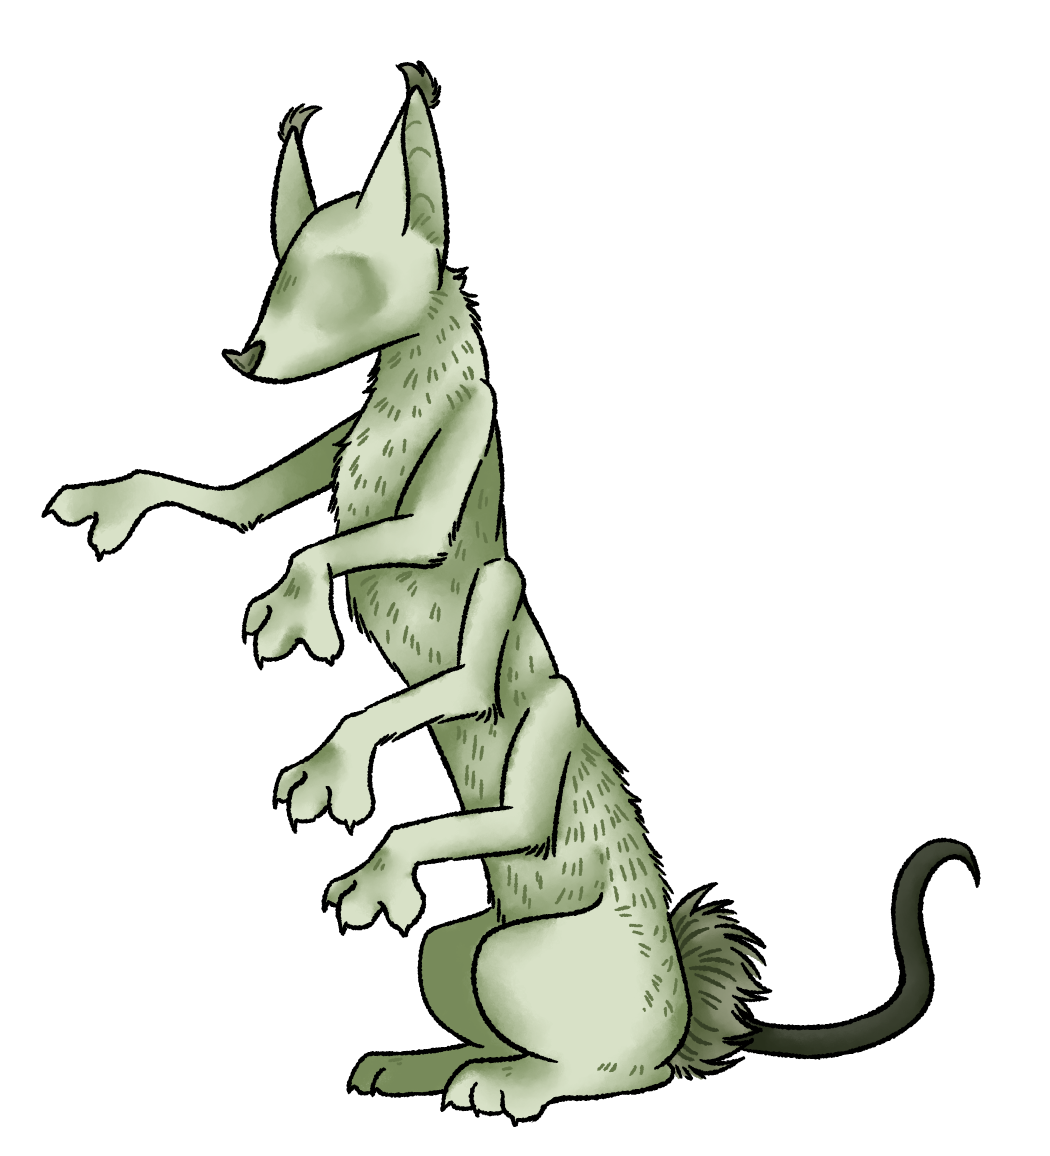 A eight legged creature with small tufts of fur at the end of her ears, an upturned bat-like nose, a furless tail, and a large tuft of fur at the base of her tail. She has no eyes.